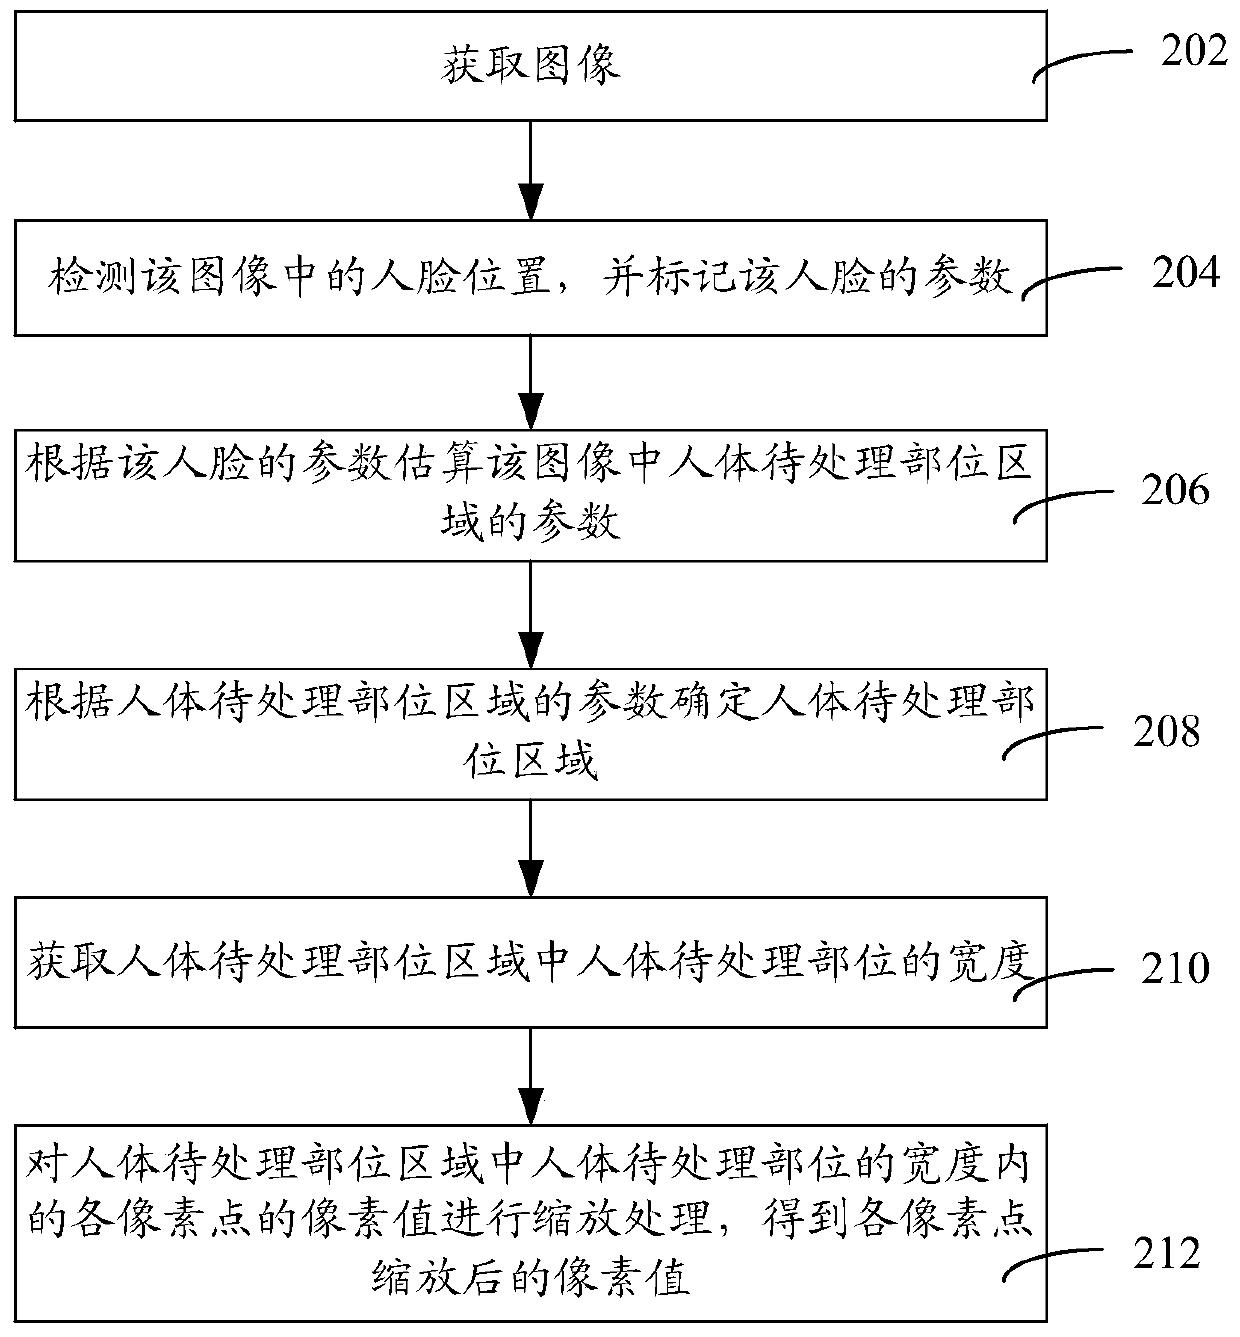 Character image processing method and device